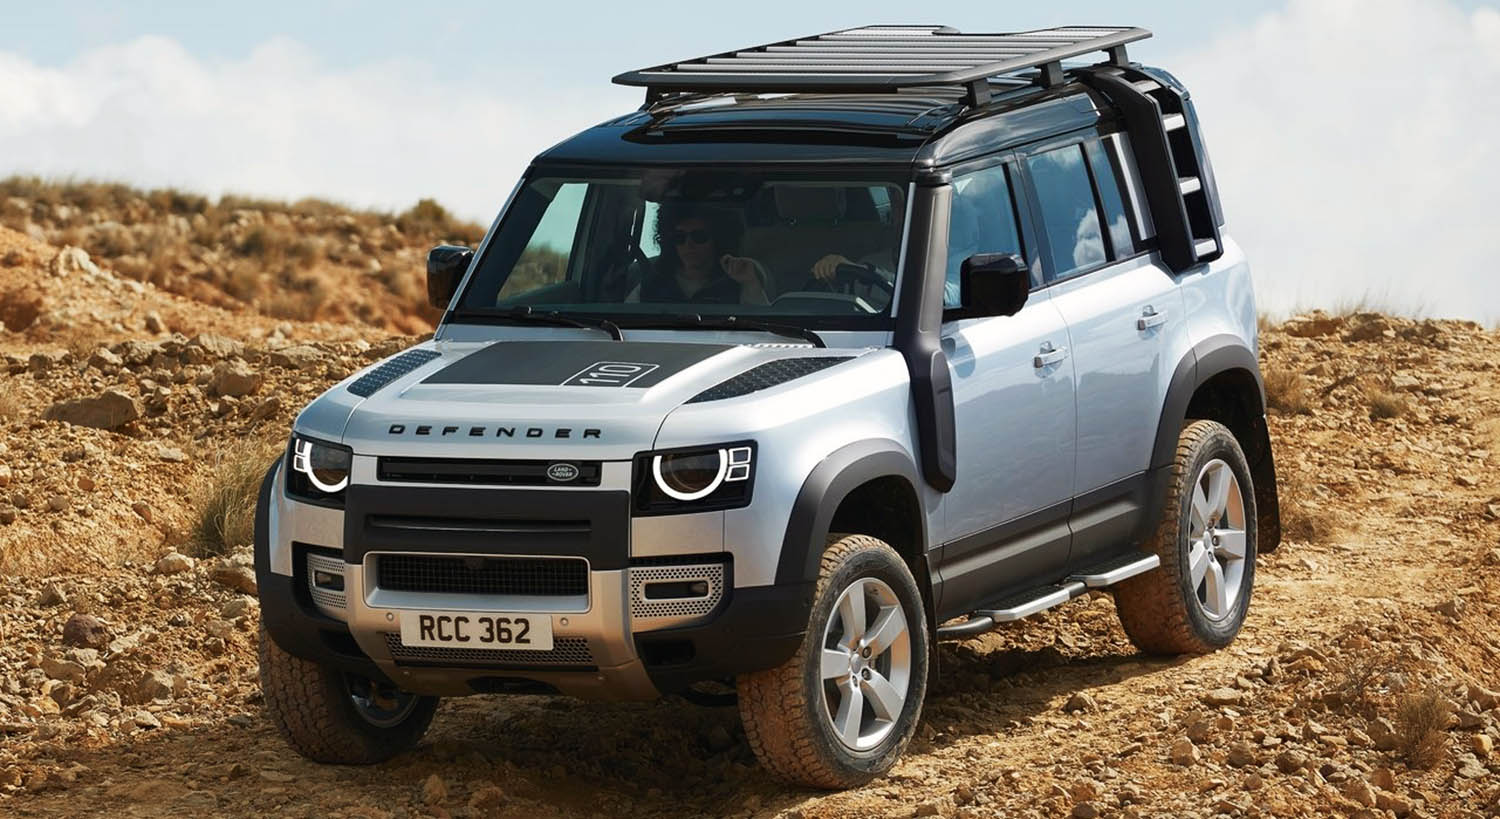 New Land Rover Defender 130: The Unstoppable 8-Seat Explorer